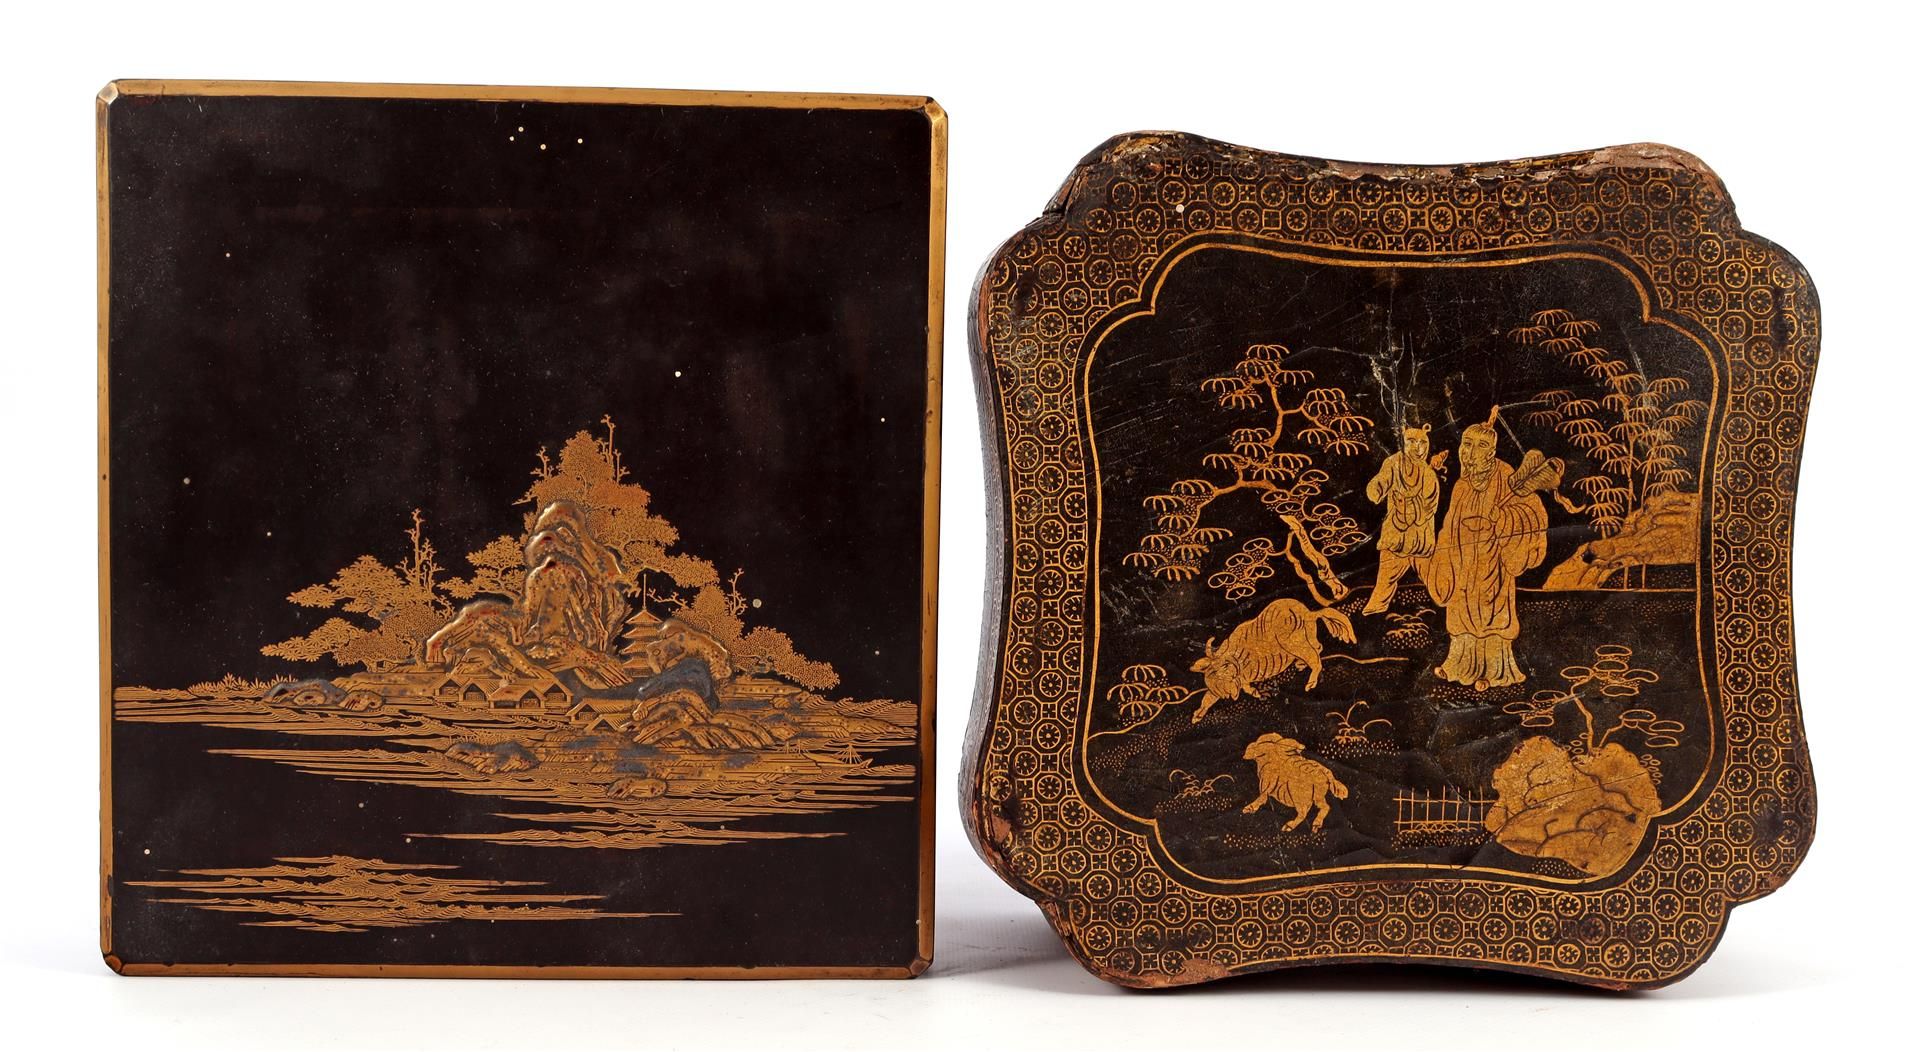 Chinese lacquer box with decoration in gold leaf - Image 4 of 4